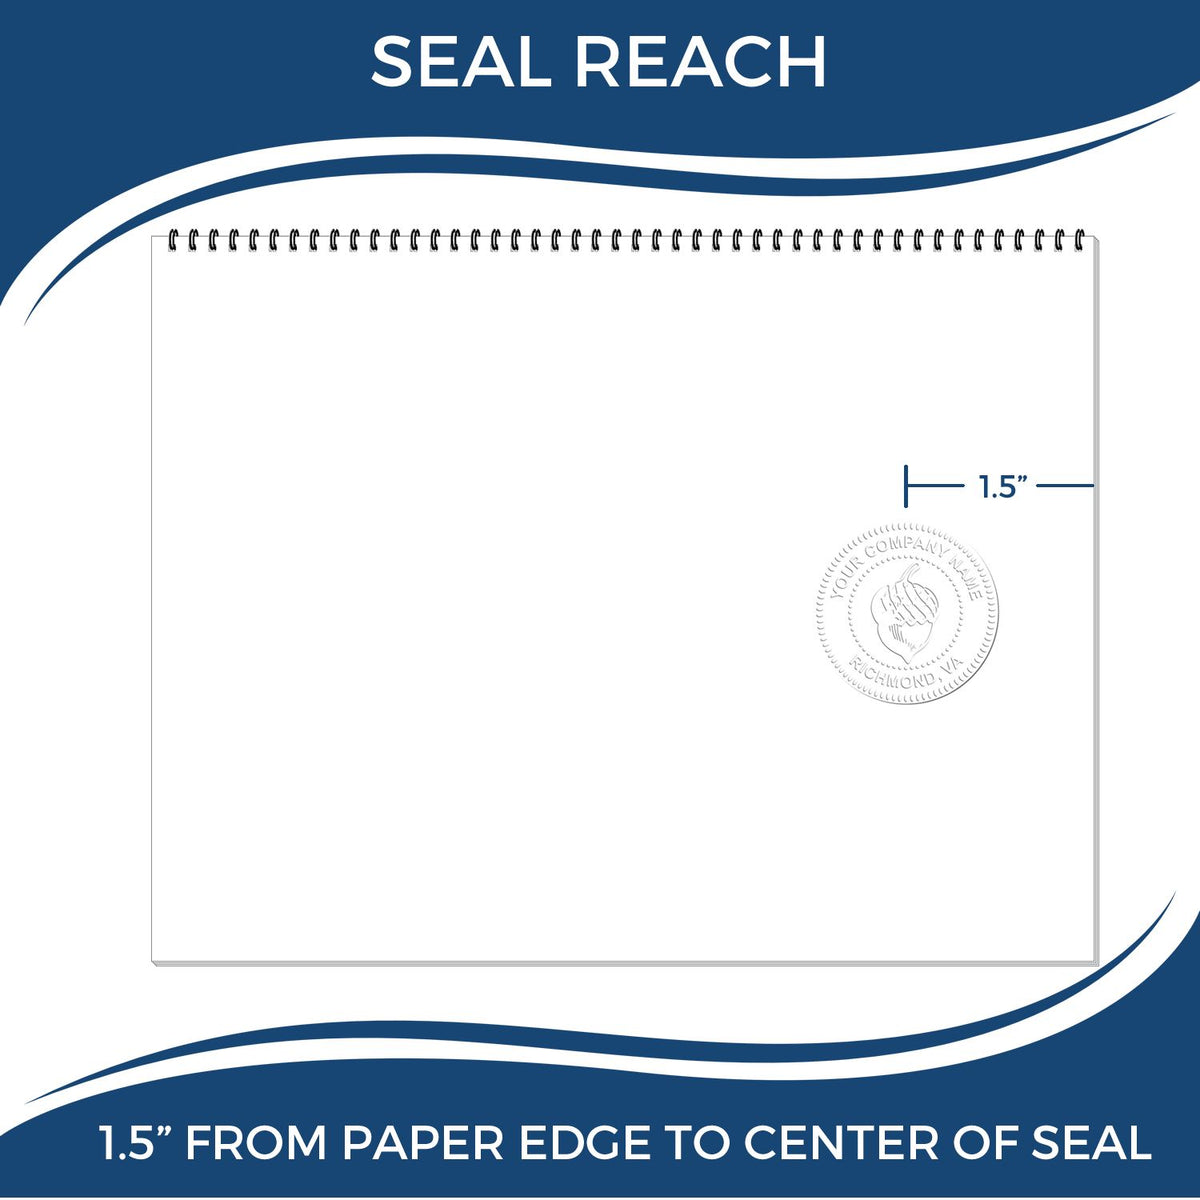 An infographic showing the seal reach which is represented by a ruler and a miniature seal image of the State of New Mexico Soft Land Surveyor Embossing Seal